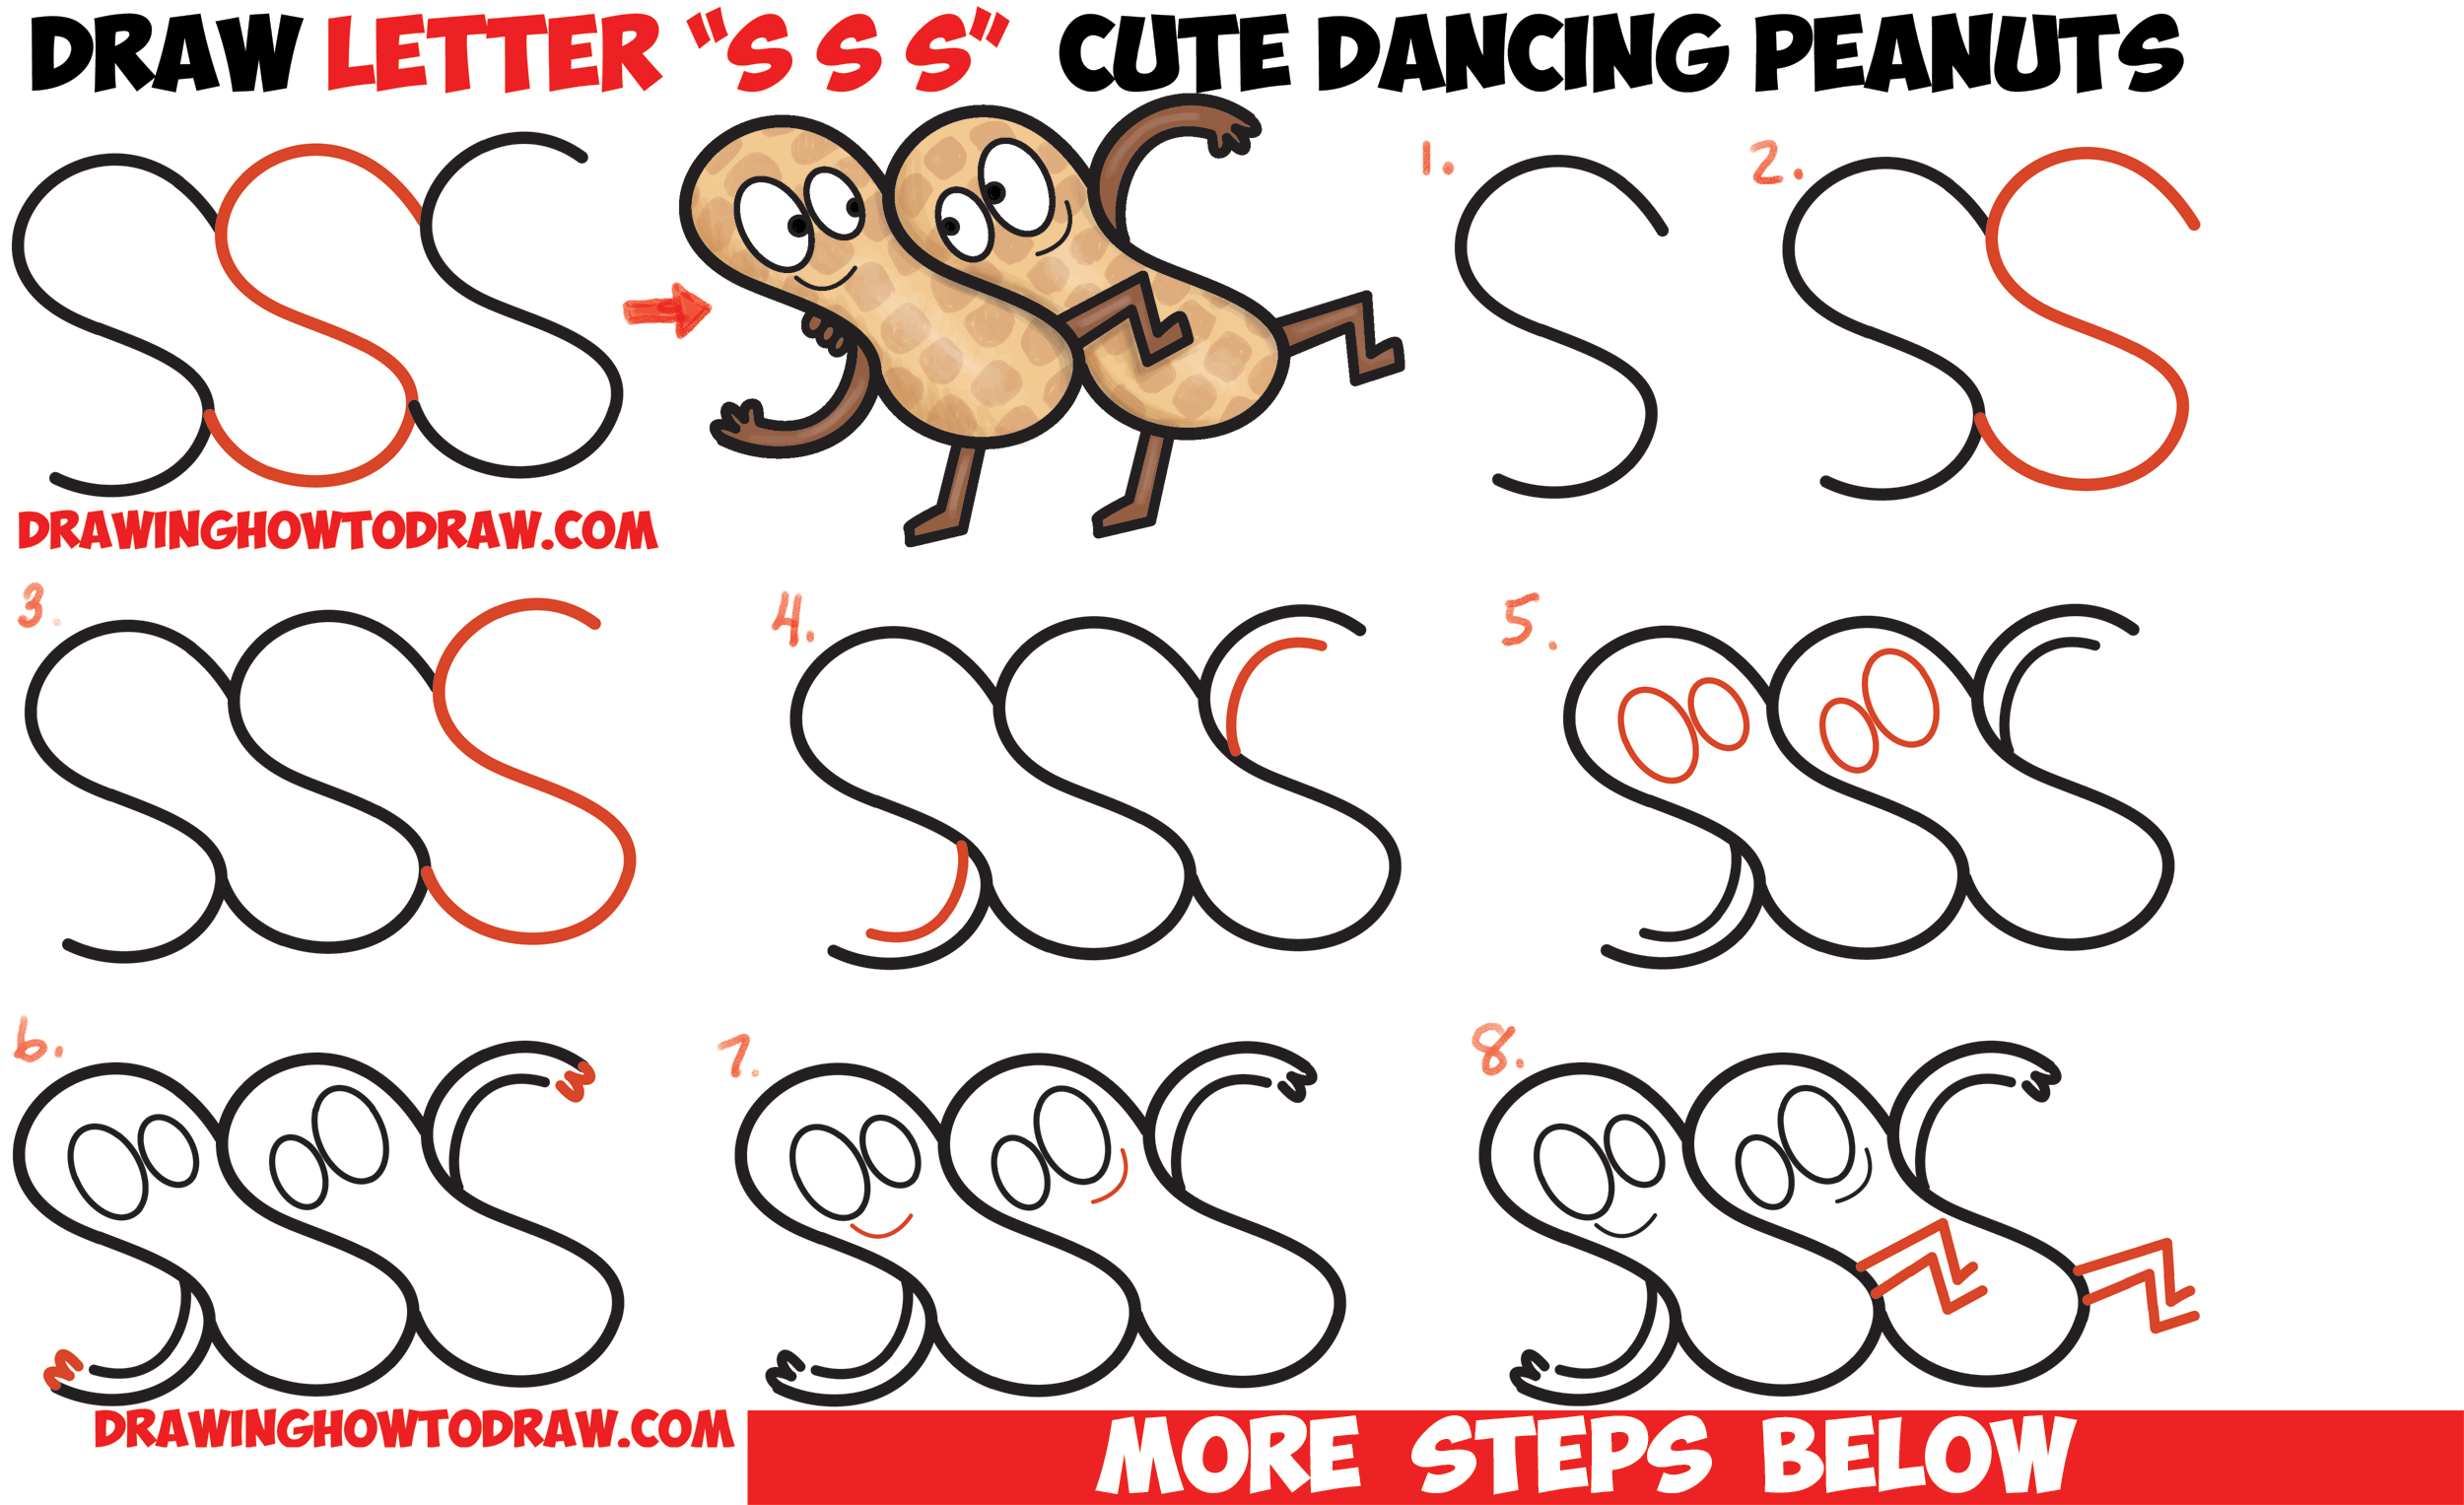 How to Draw Cartoon Dancing Peanuts from Letter S Shapes Easy Step by Step Drawing Tutorial for Kids